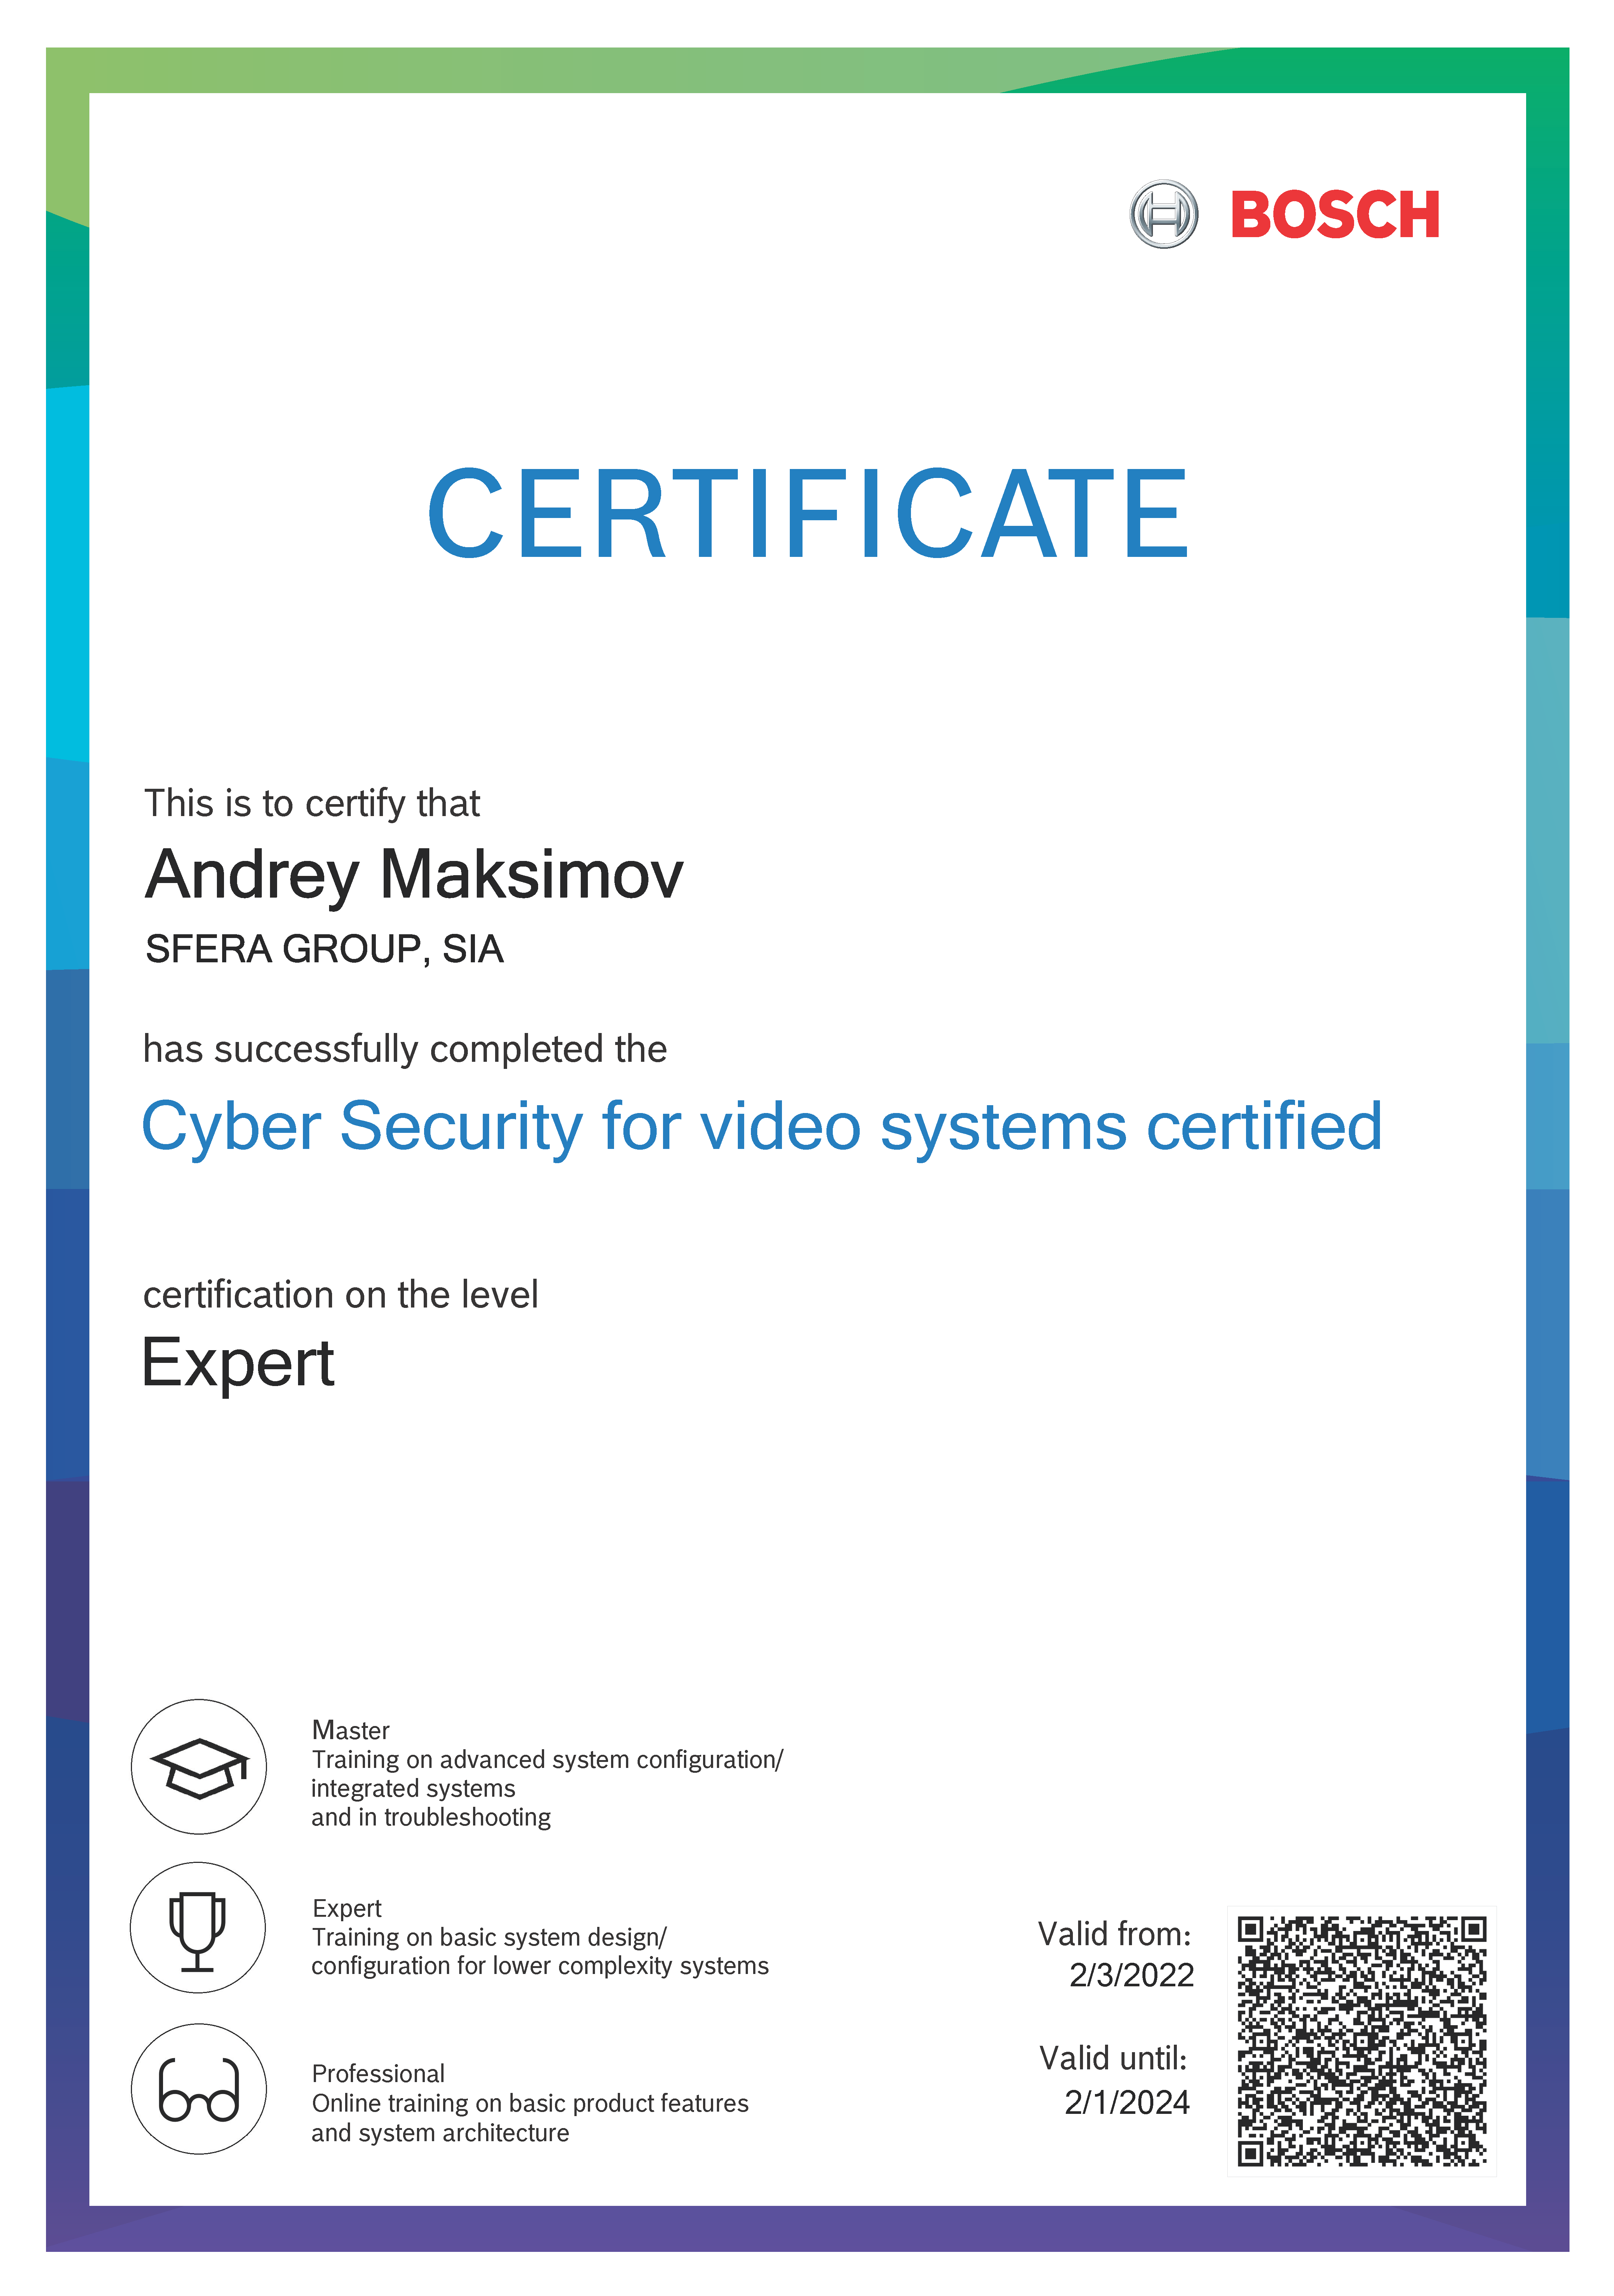 Bosch Cyber Security for Video Systems Expert